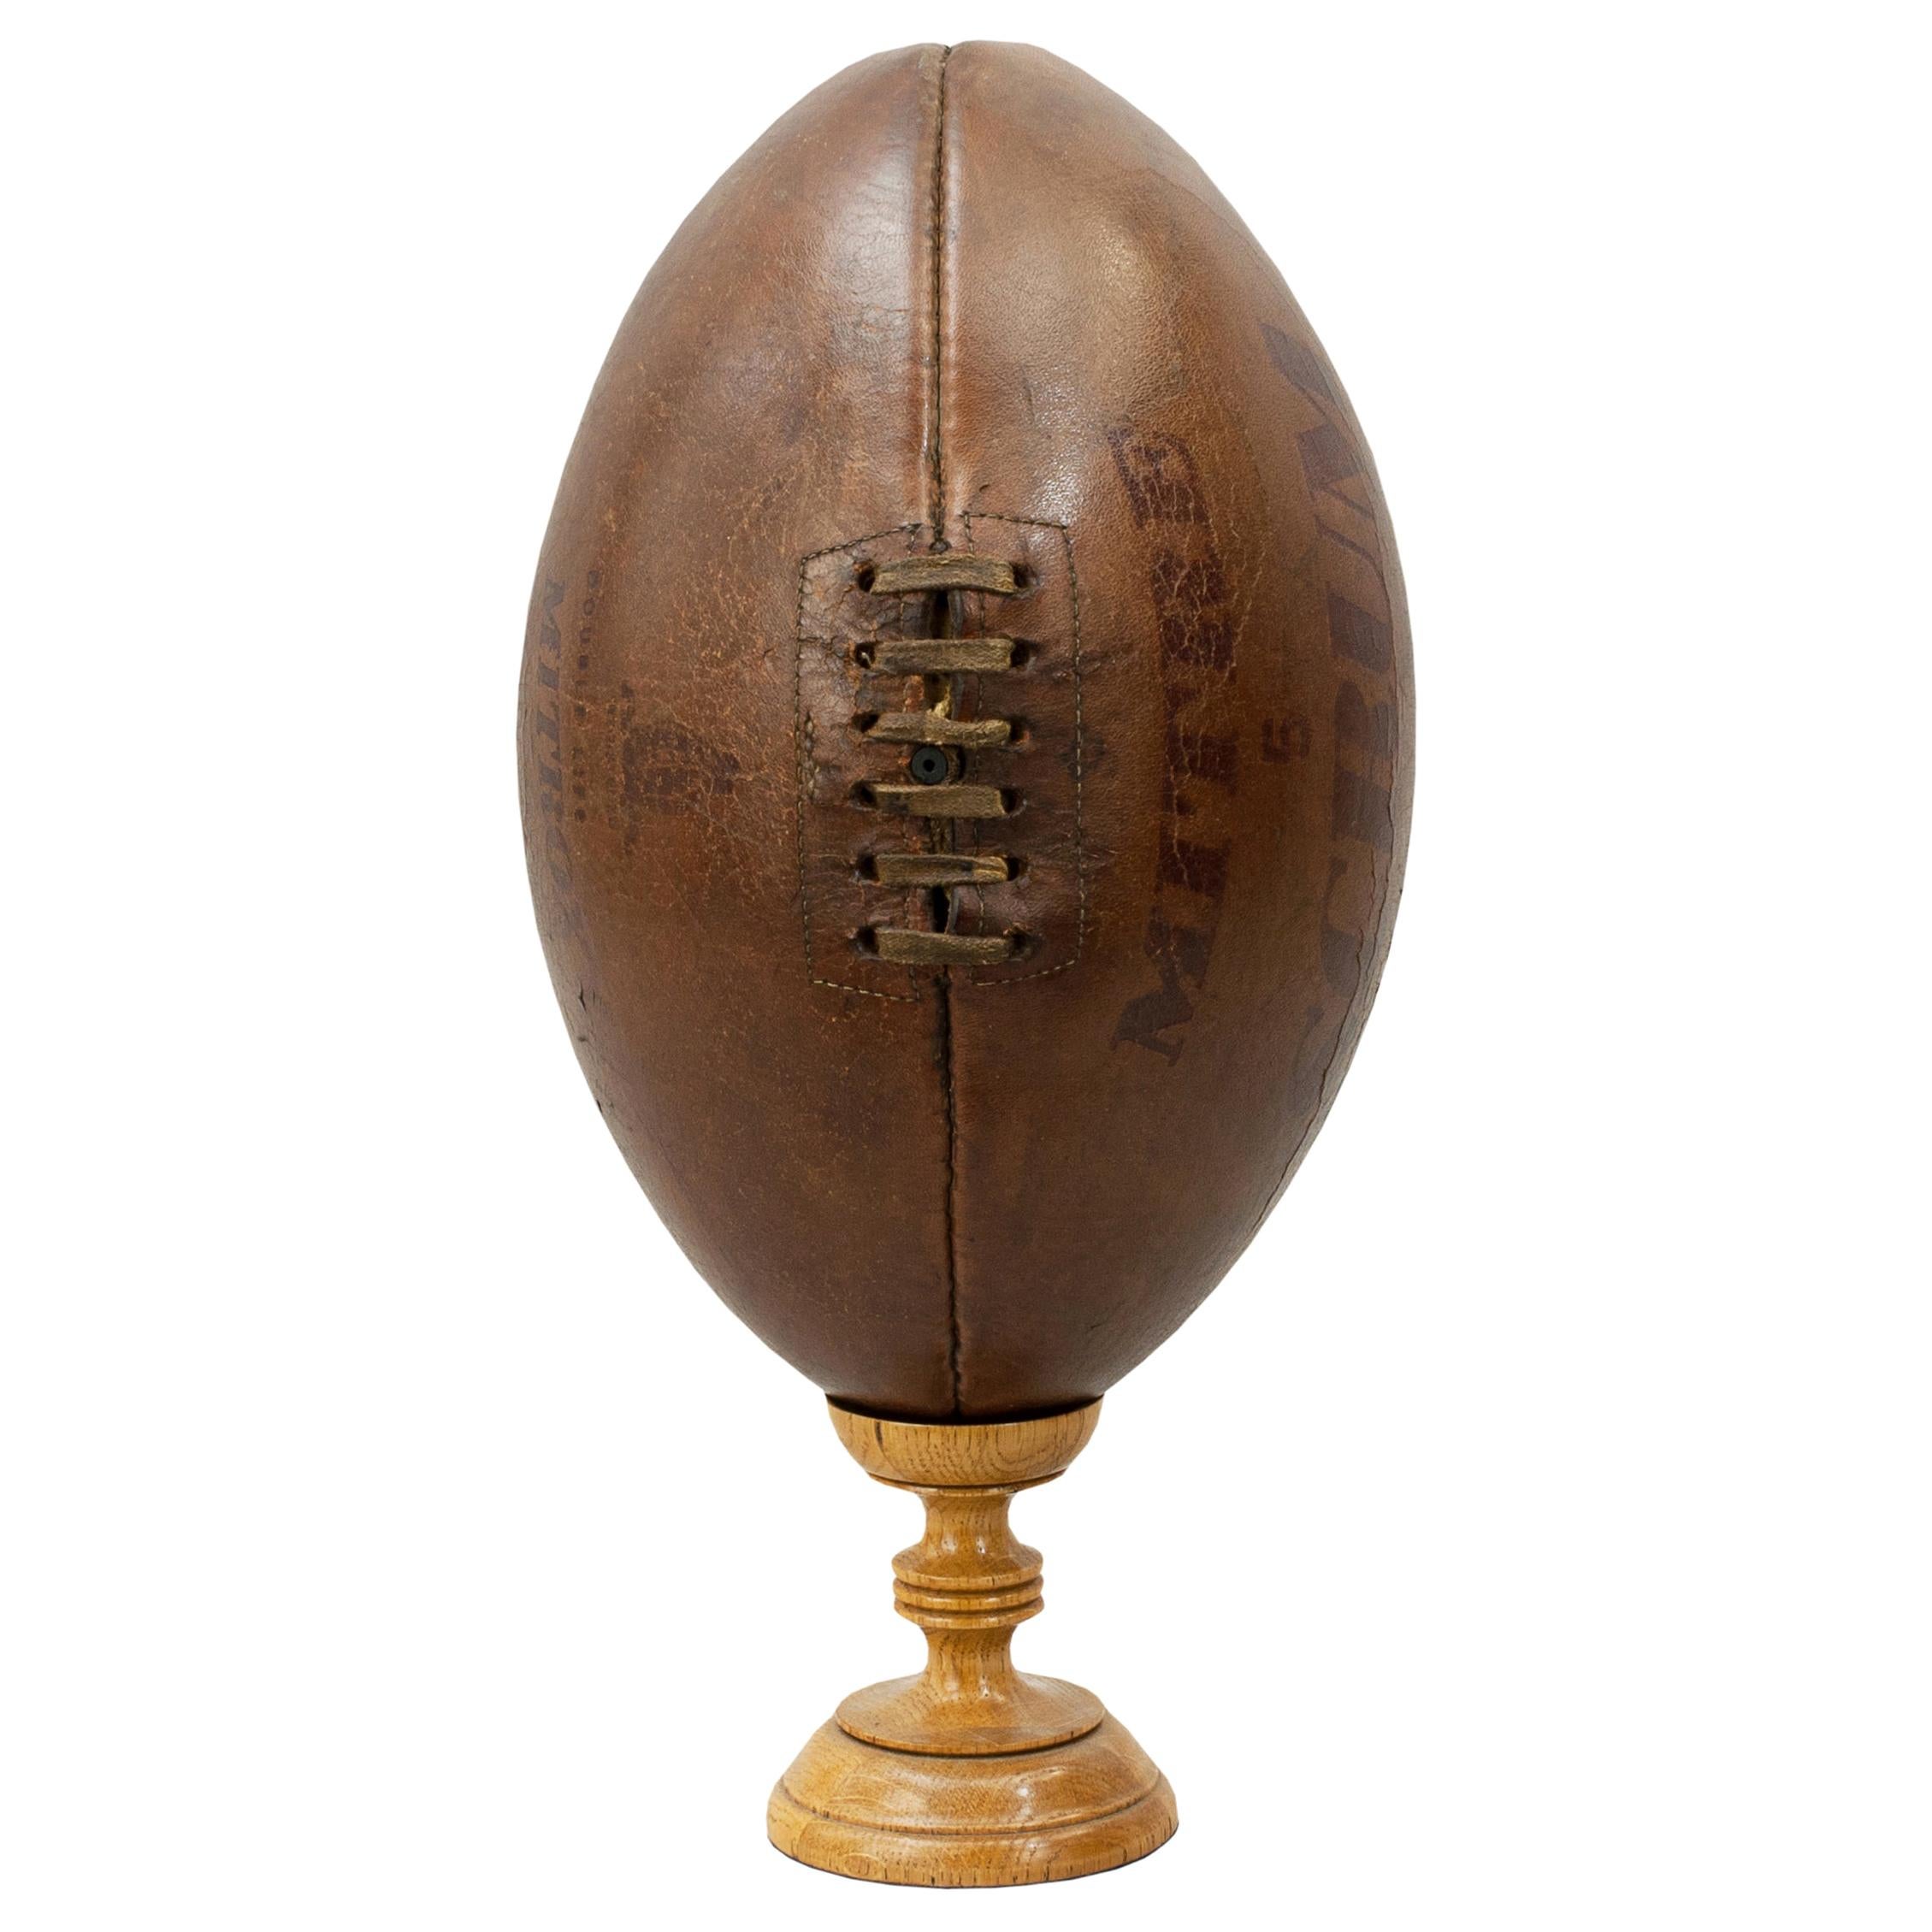 Antique Leather Rugby Ball, Mitre Scrum No. 5